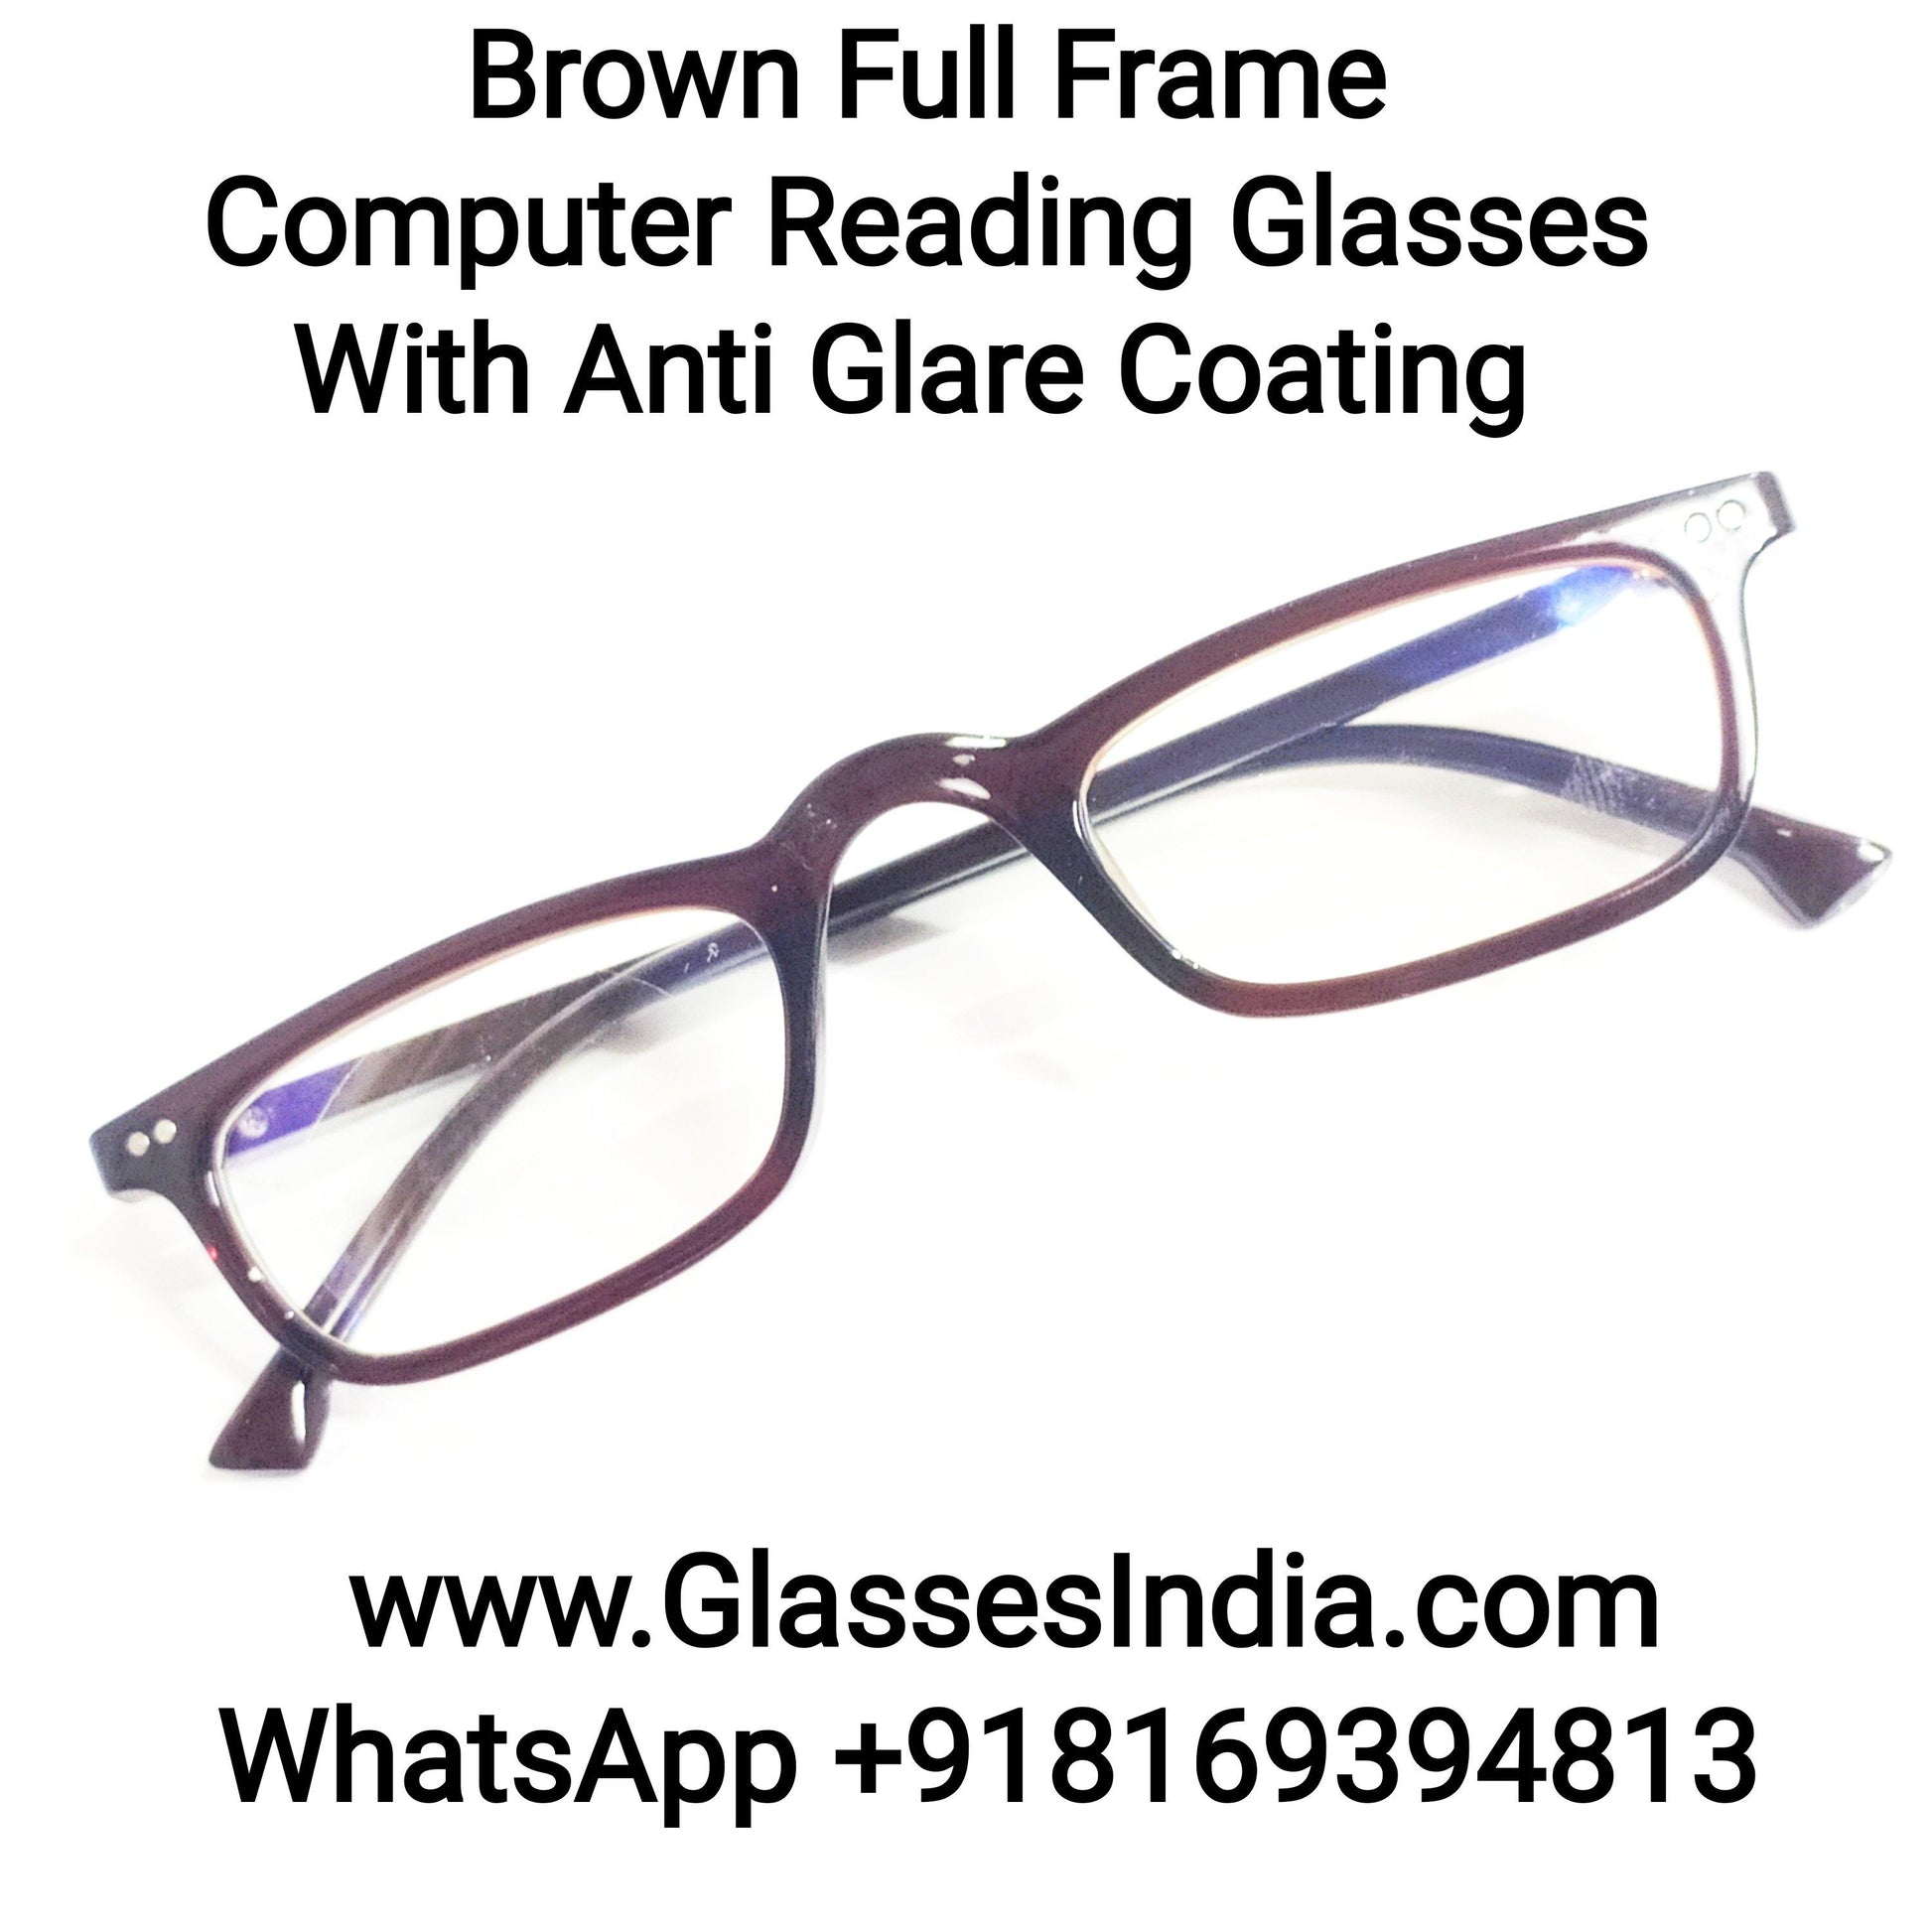 Buy Brown Full Frame Computer Reading Glasses with Anti Glare Coating Power 1.25 - Glasses India Online in India